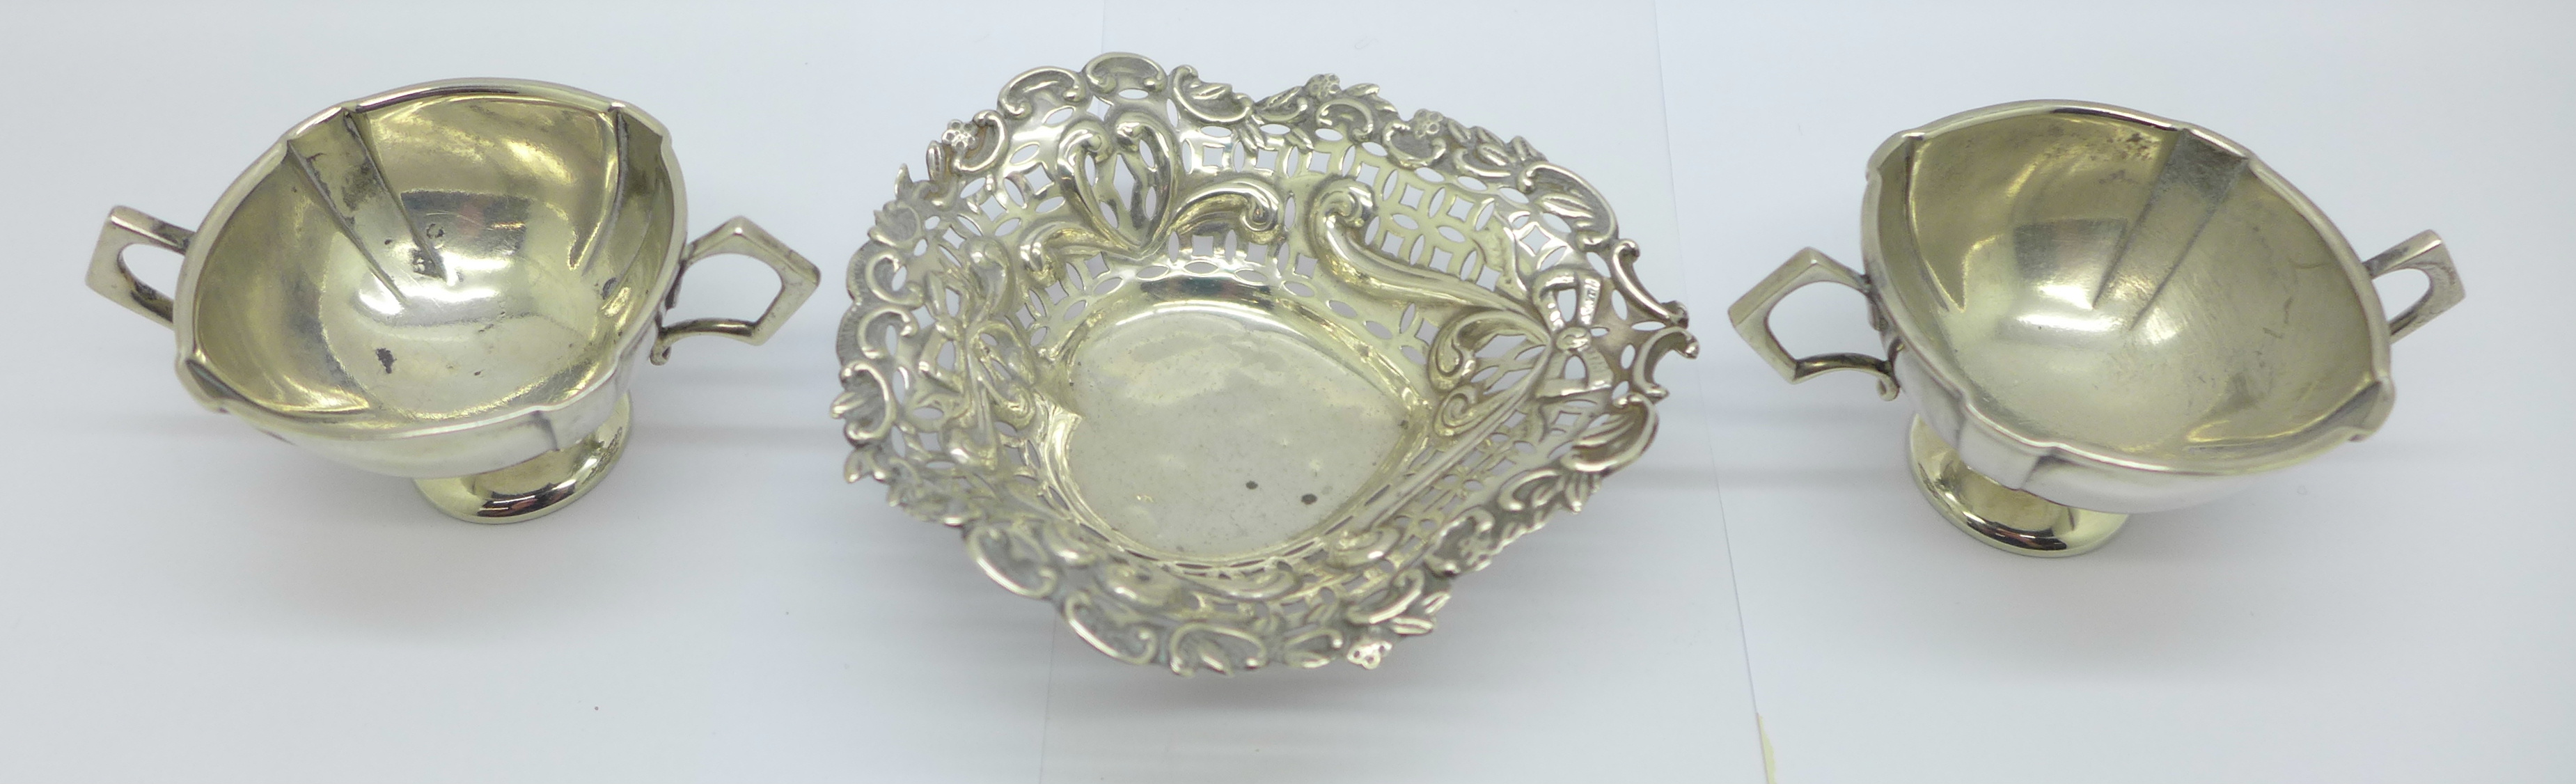 A pierced silver dish and a pair of silver salts, 73g